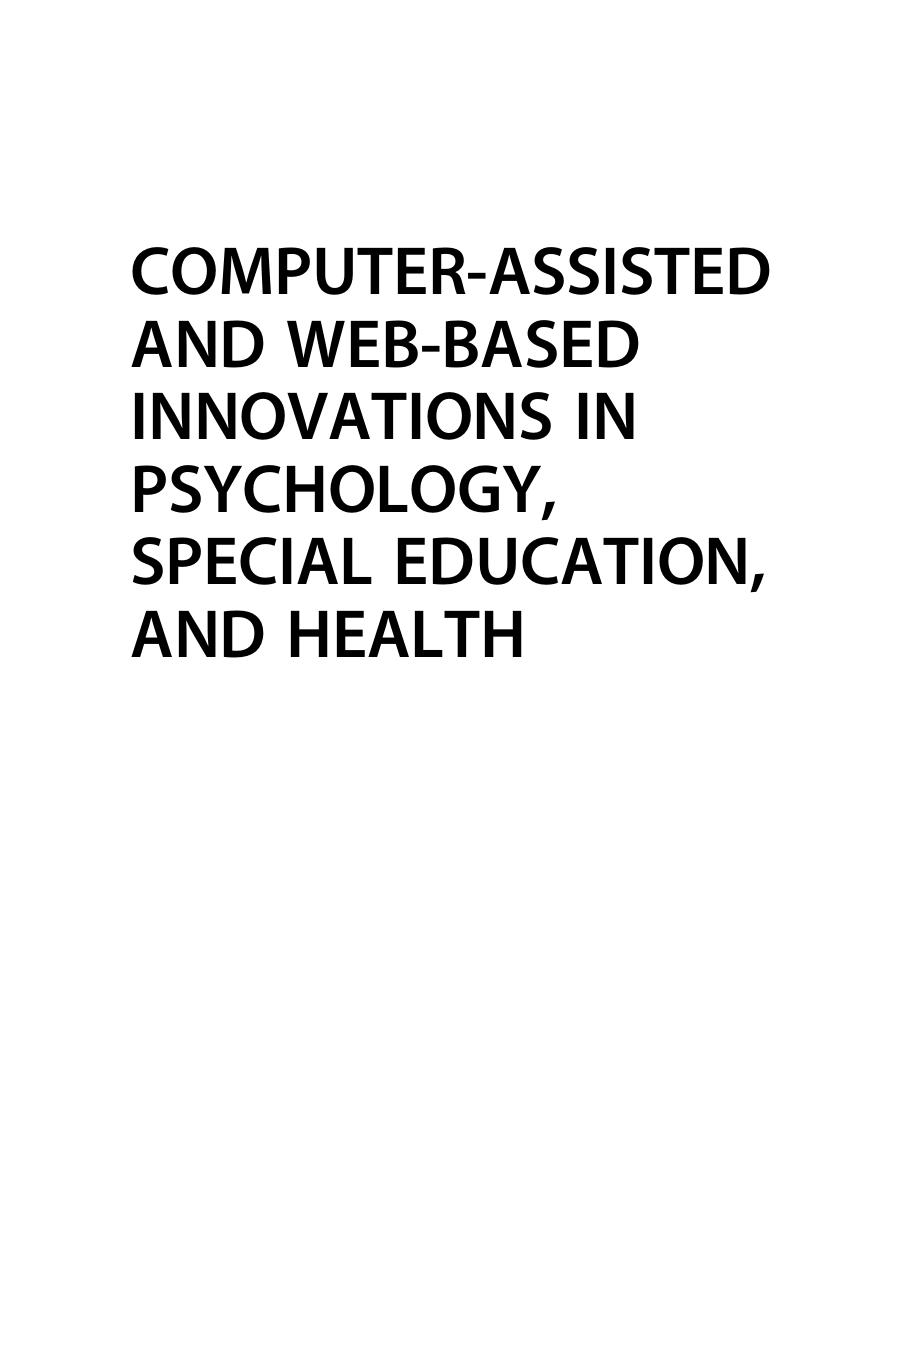 Computer-Assisted and Web-based Innovations in Psychology, Special Education, and Health 2016